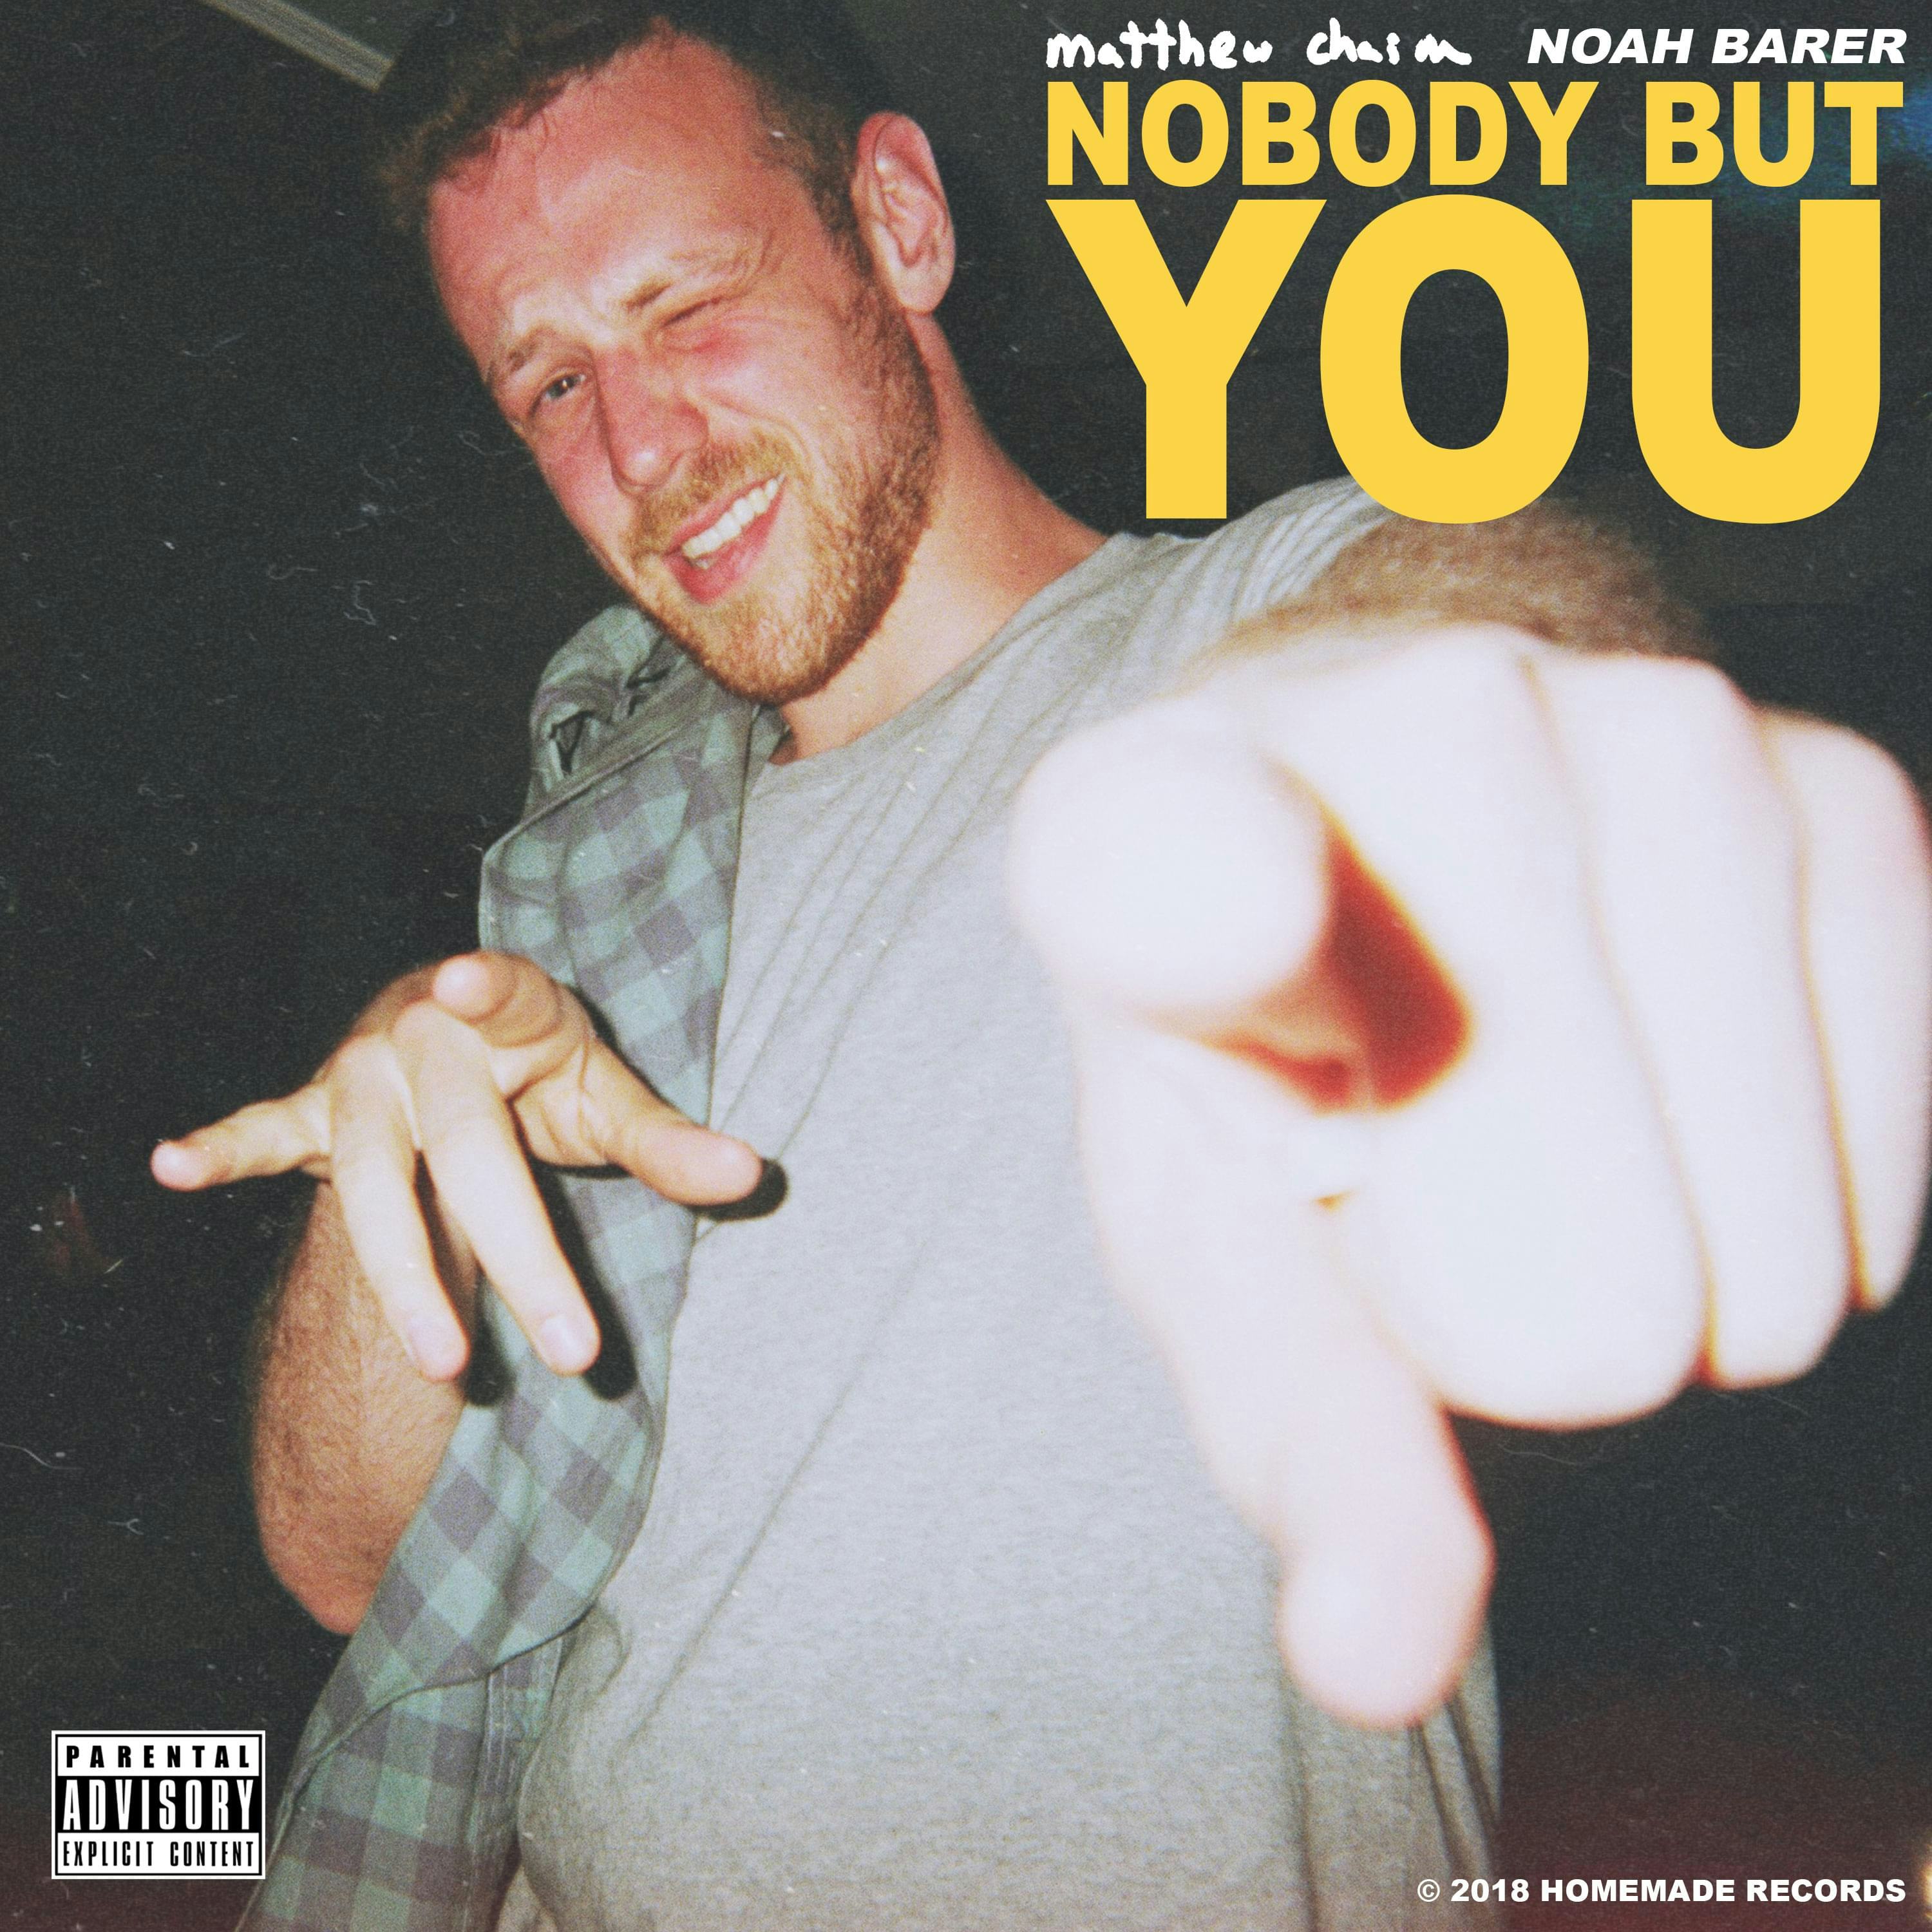 Cover art for Nobody But You by Matthew Chaim